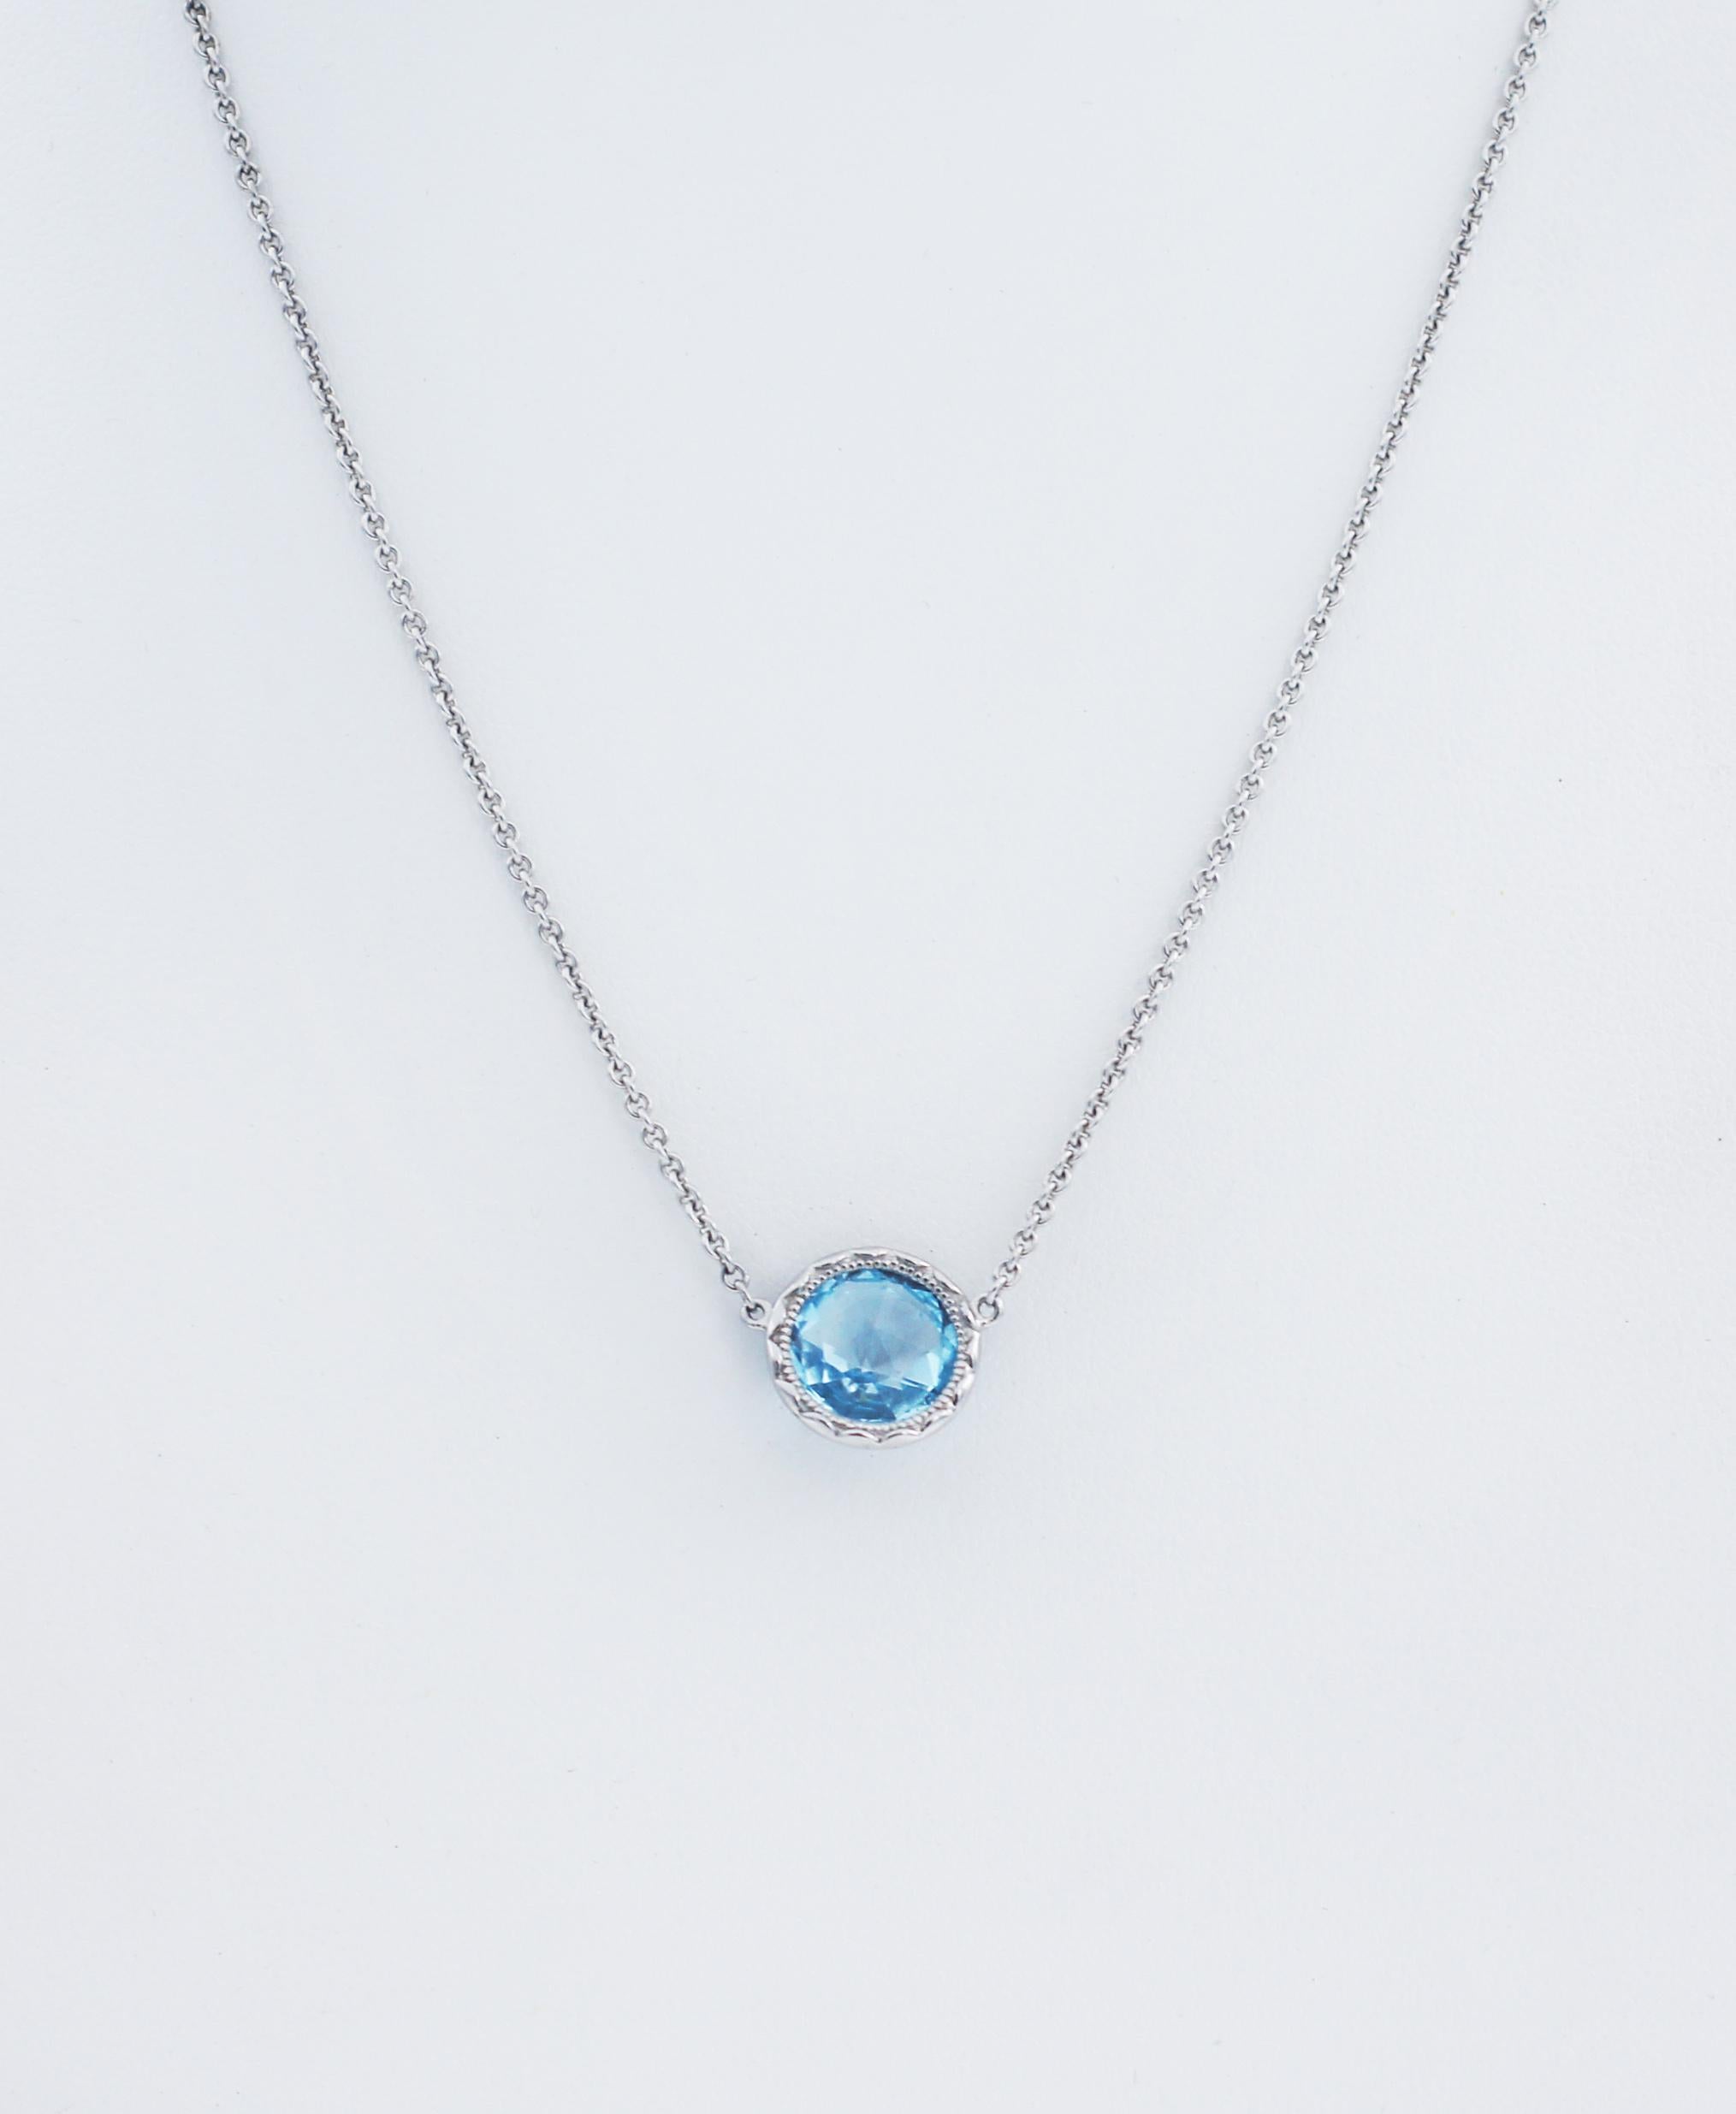 TACORI
Crescent Embrace
Floating Bezel Necklace featuring Sky Blue Topaz
STYLE SN15302
Like a part of the clear blue sky encased in a droplet, this Sky Blue Topaz pendant shines like a true beauty, as it floats on a classic silver chain.
Gemstone